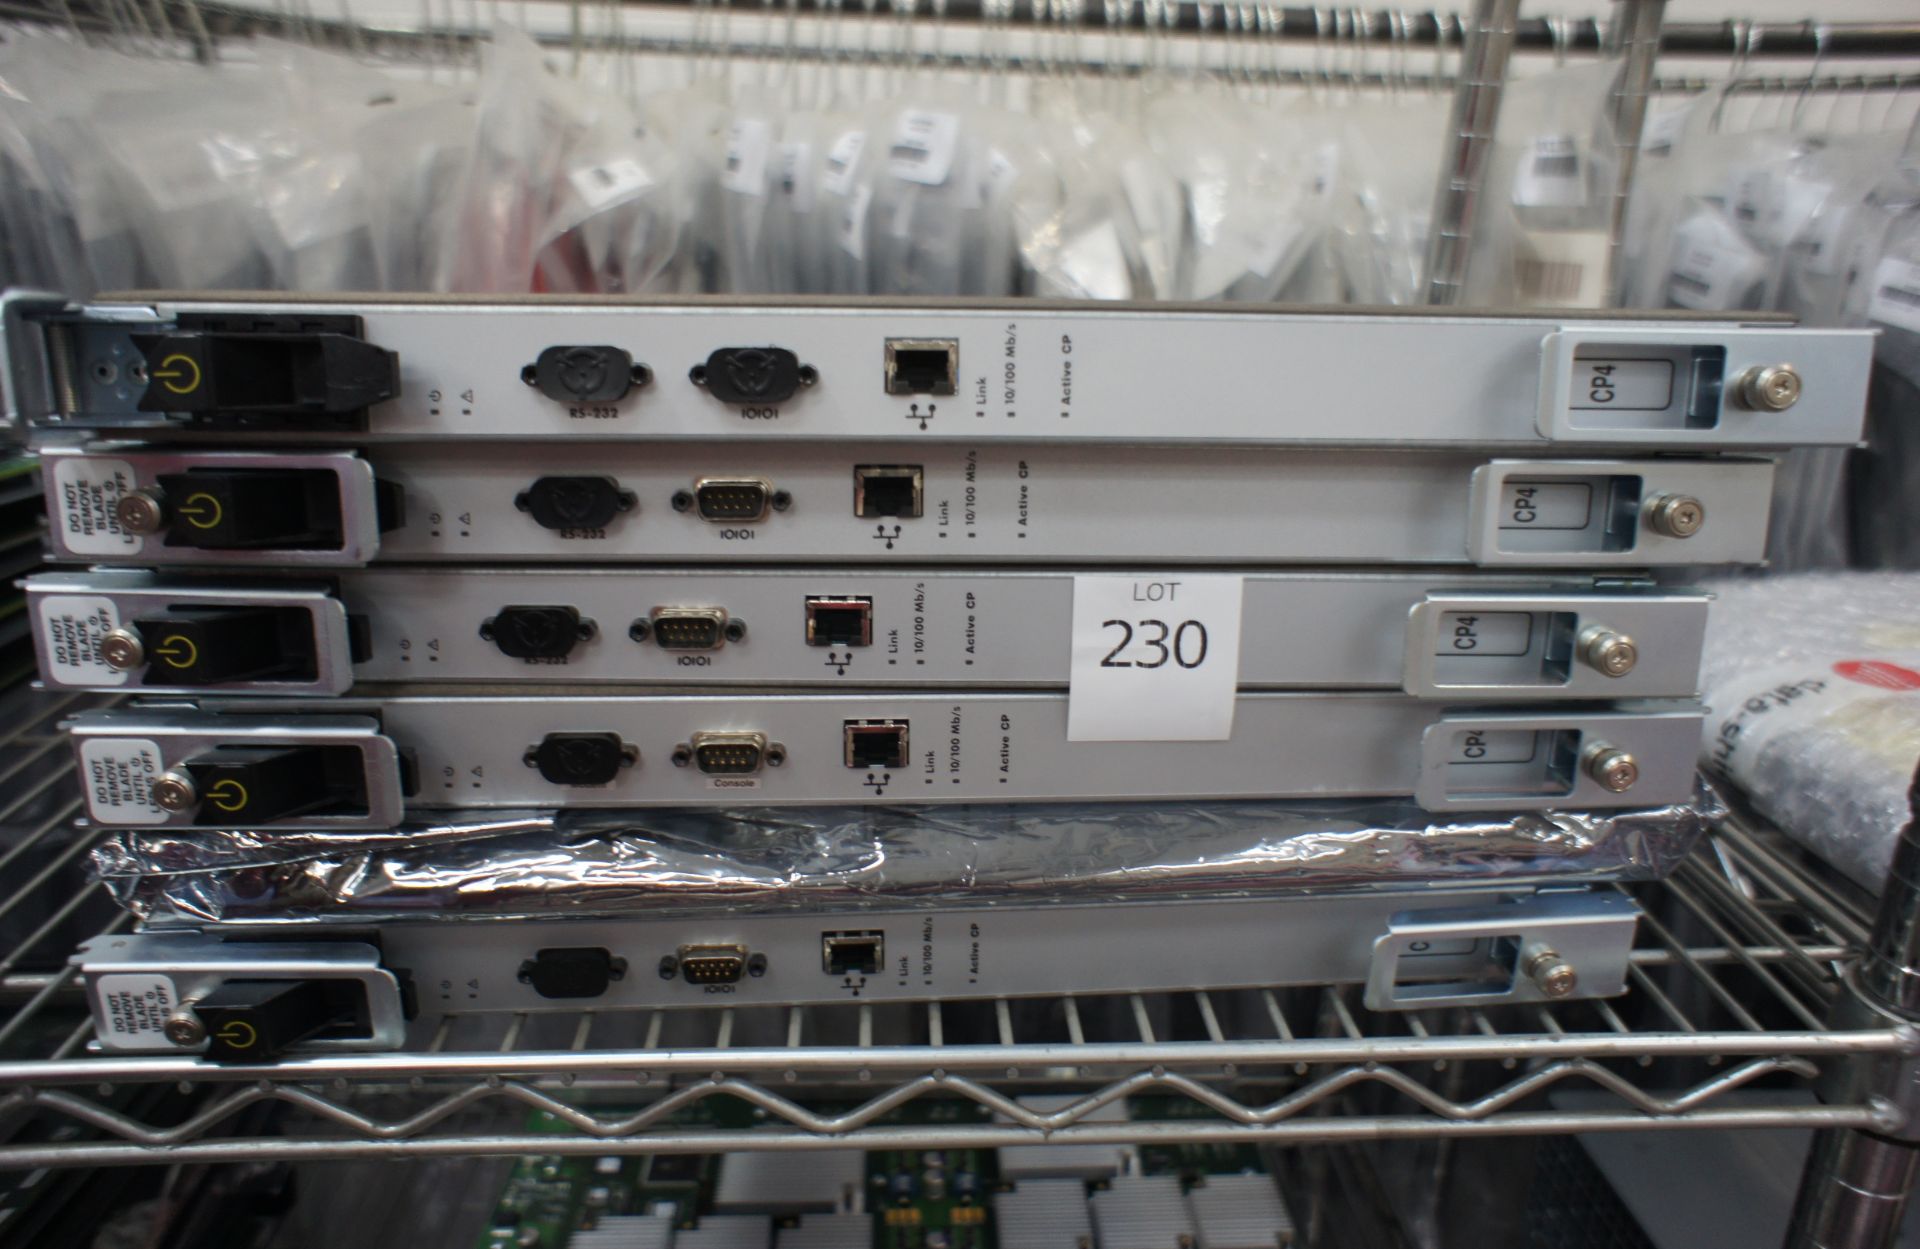 3 x Cisco DS-CAC-6000W Power Supplies (unboxed), 1 x Brocade FastIron FCX624-E-ADV switch, FCX, 3 - Image 12 of 34